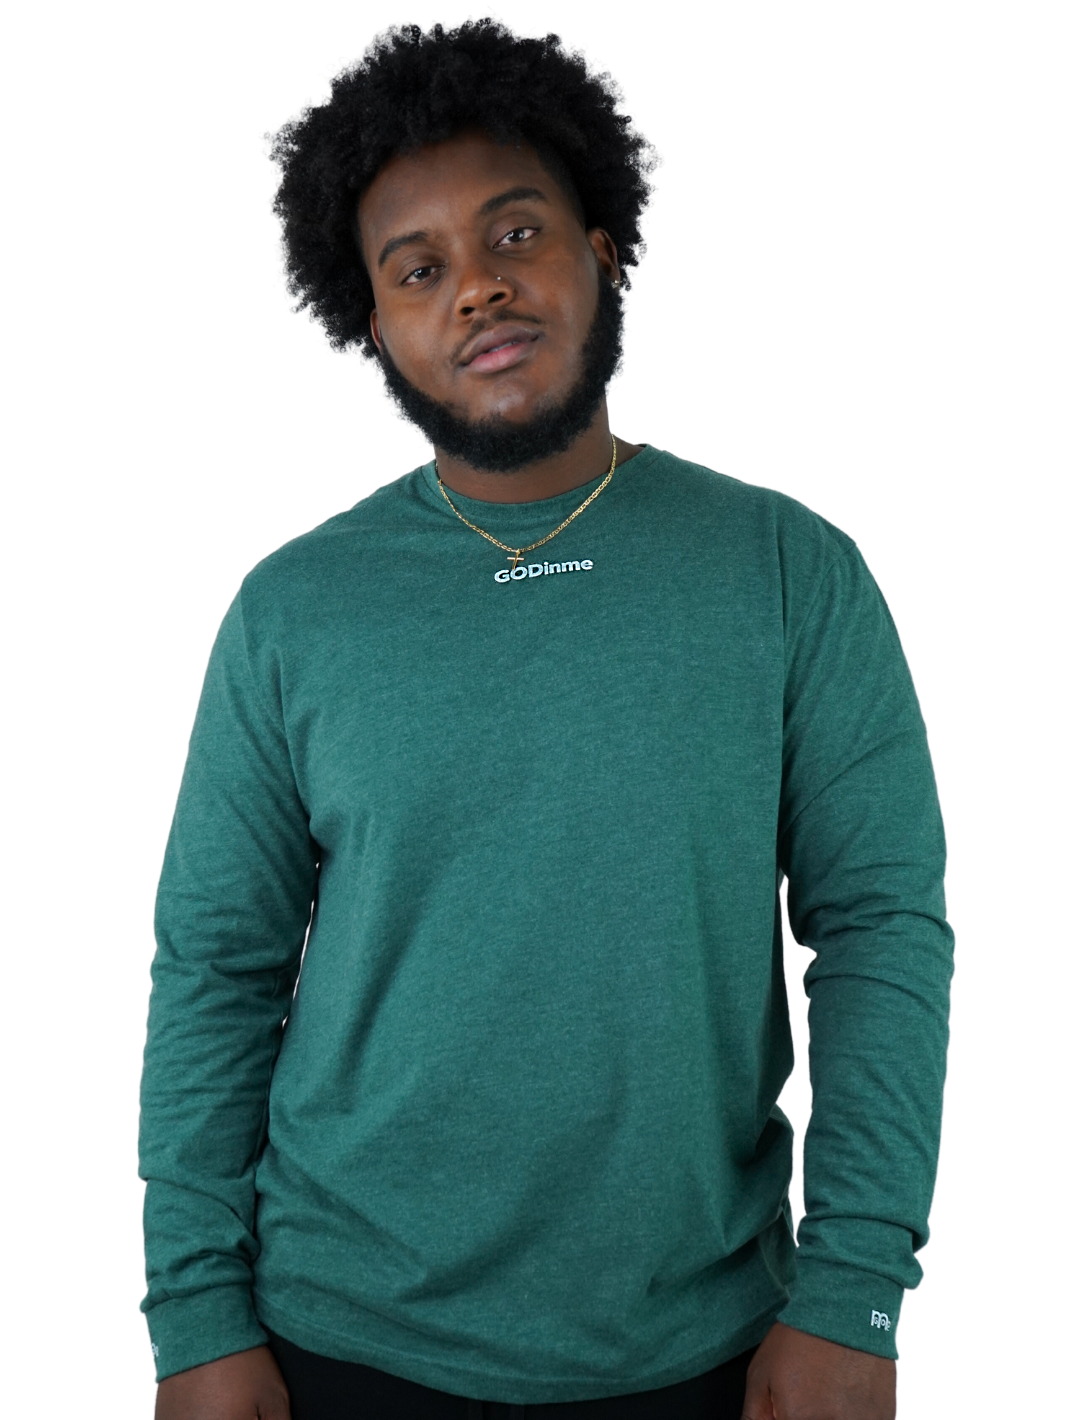 Made to feel like sueded peach fuzz, this Green long sleeve shirt offers unbeatable comfort. The GODinme printed on front chest and the logo on sleeve cuffs and upper back represent boldness and style.